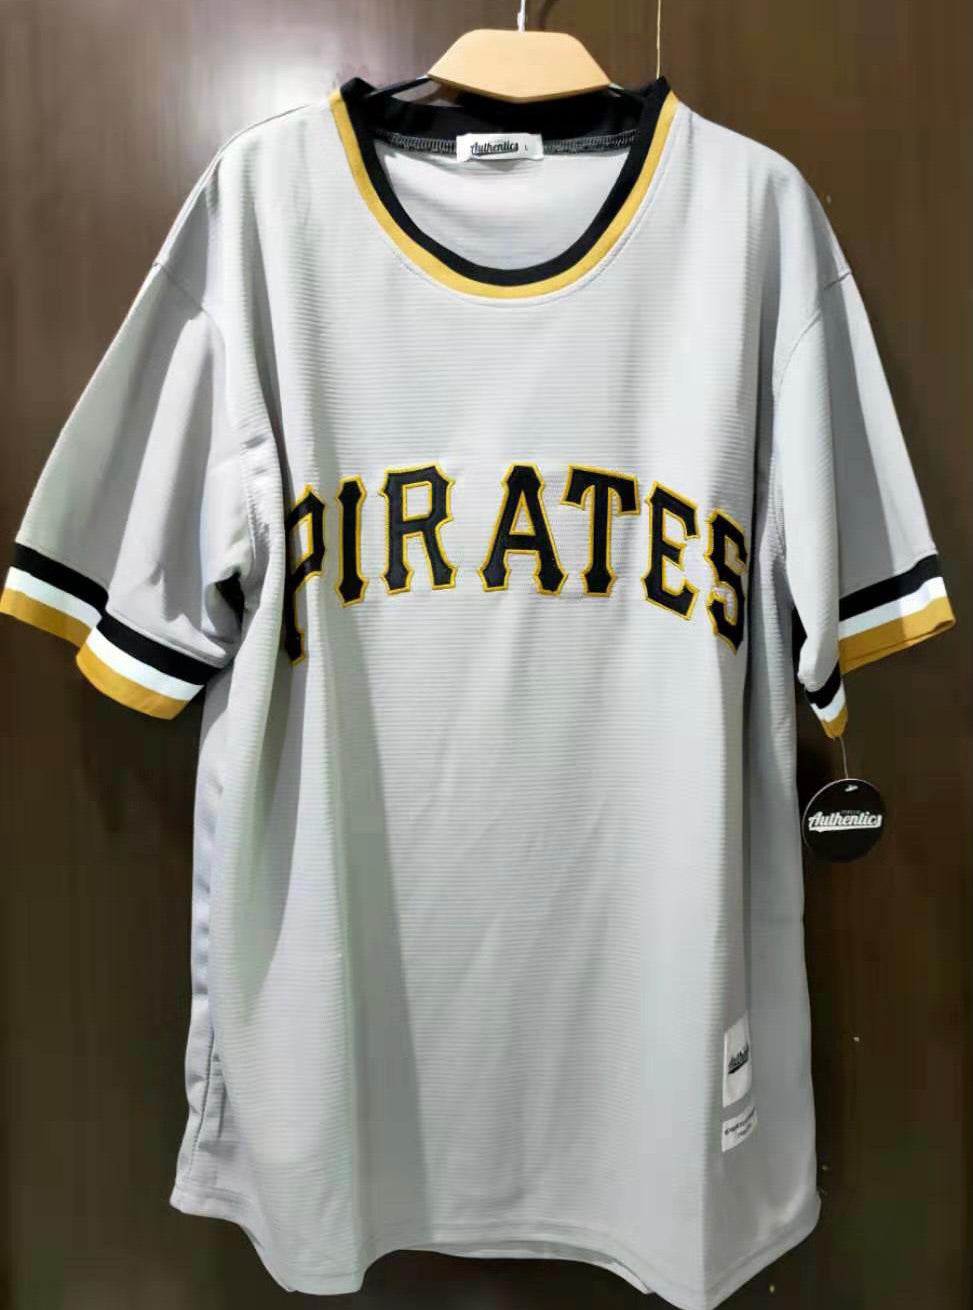 roberto clemente jersey authentic